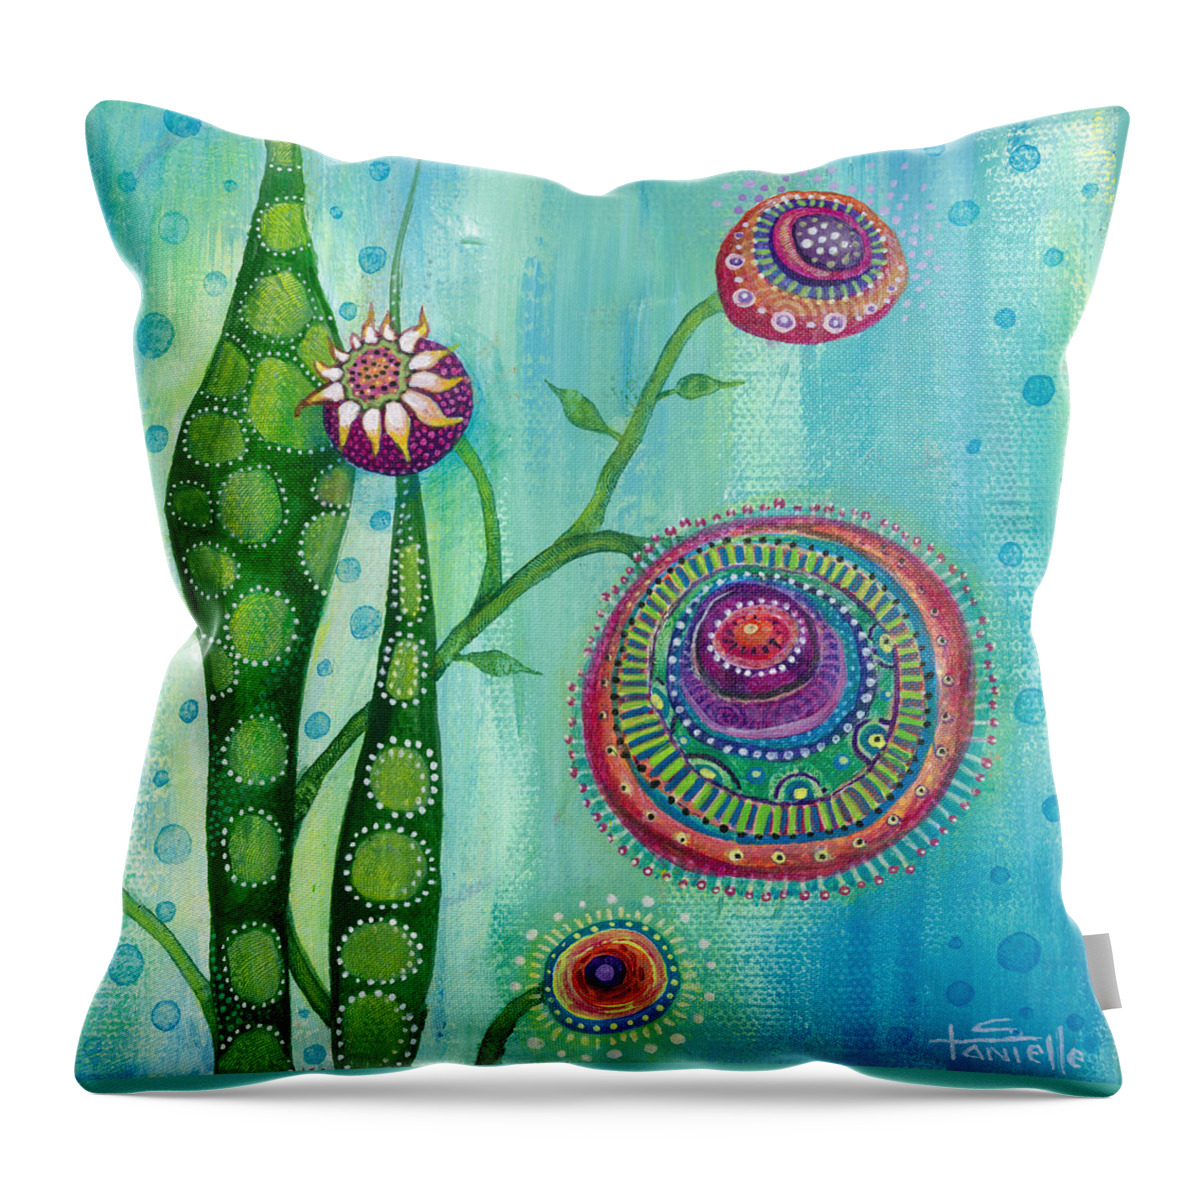 Hope Throw Pillow featuring the painting Hope by Tanielle Childers